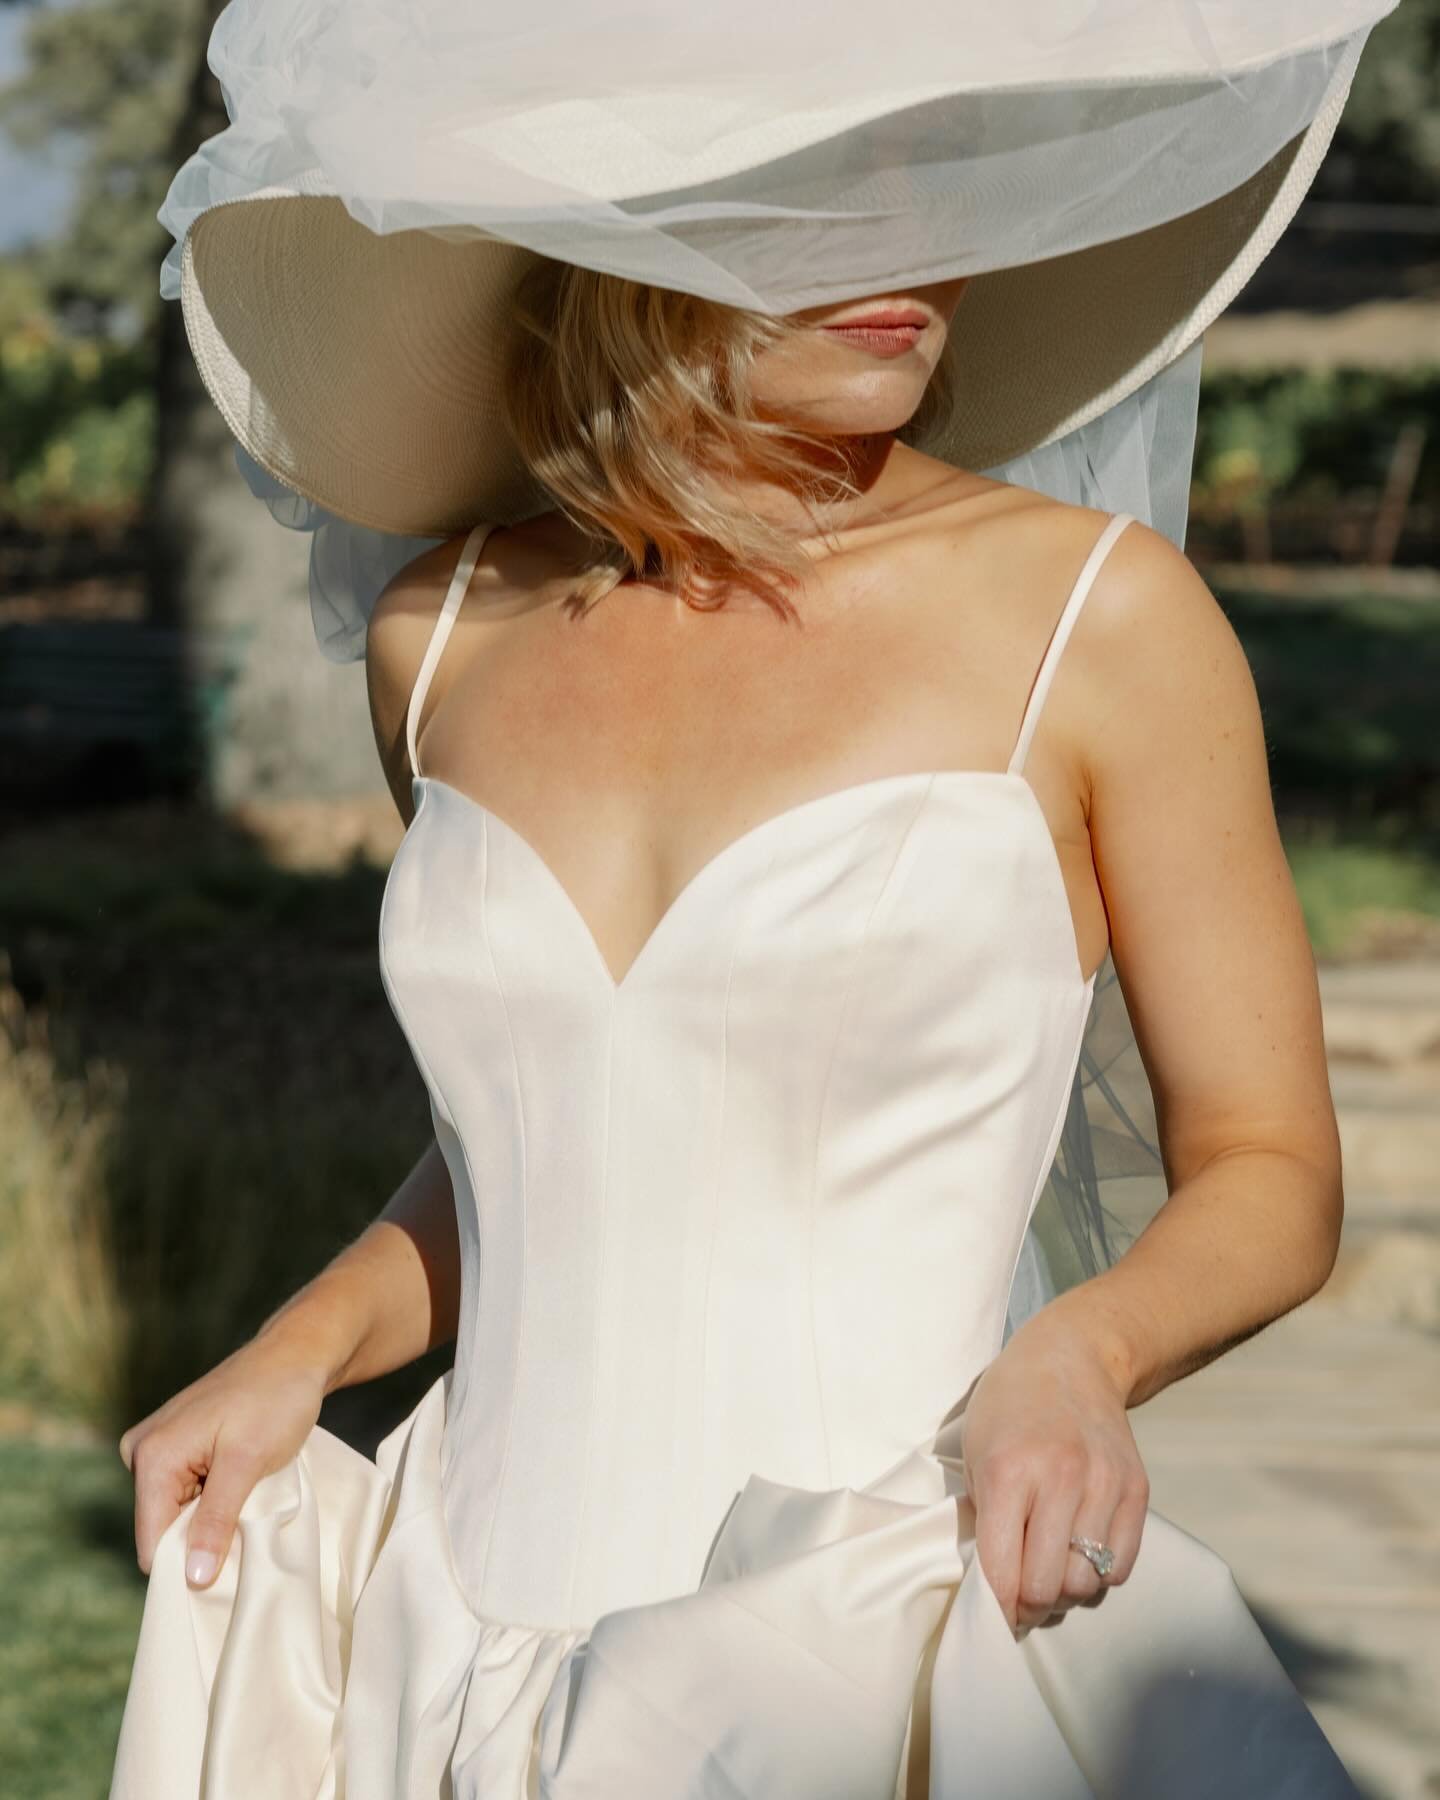 Will honestly never be over this bridal hat moment Lauren rocked. It&rsquo;s giving Meredith Blake am I right?

Also, to any brides looking for a venue that&rsquo;s private and absolutely stunning in the Santa Ynez area, @latarantella_gfv is 👩🏼&zwj